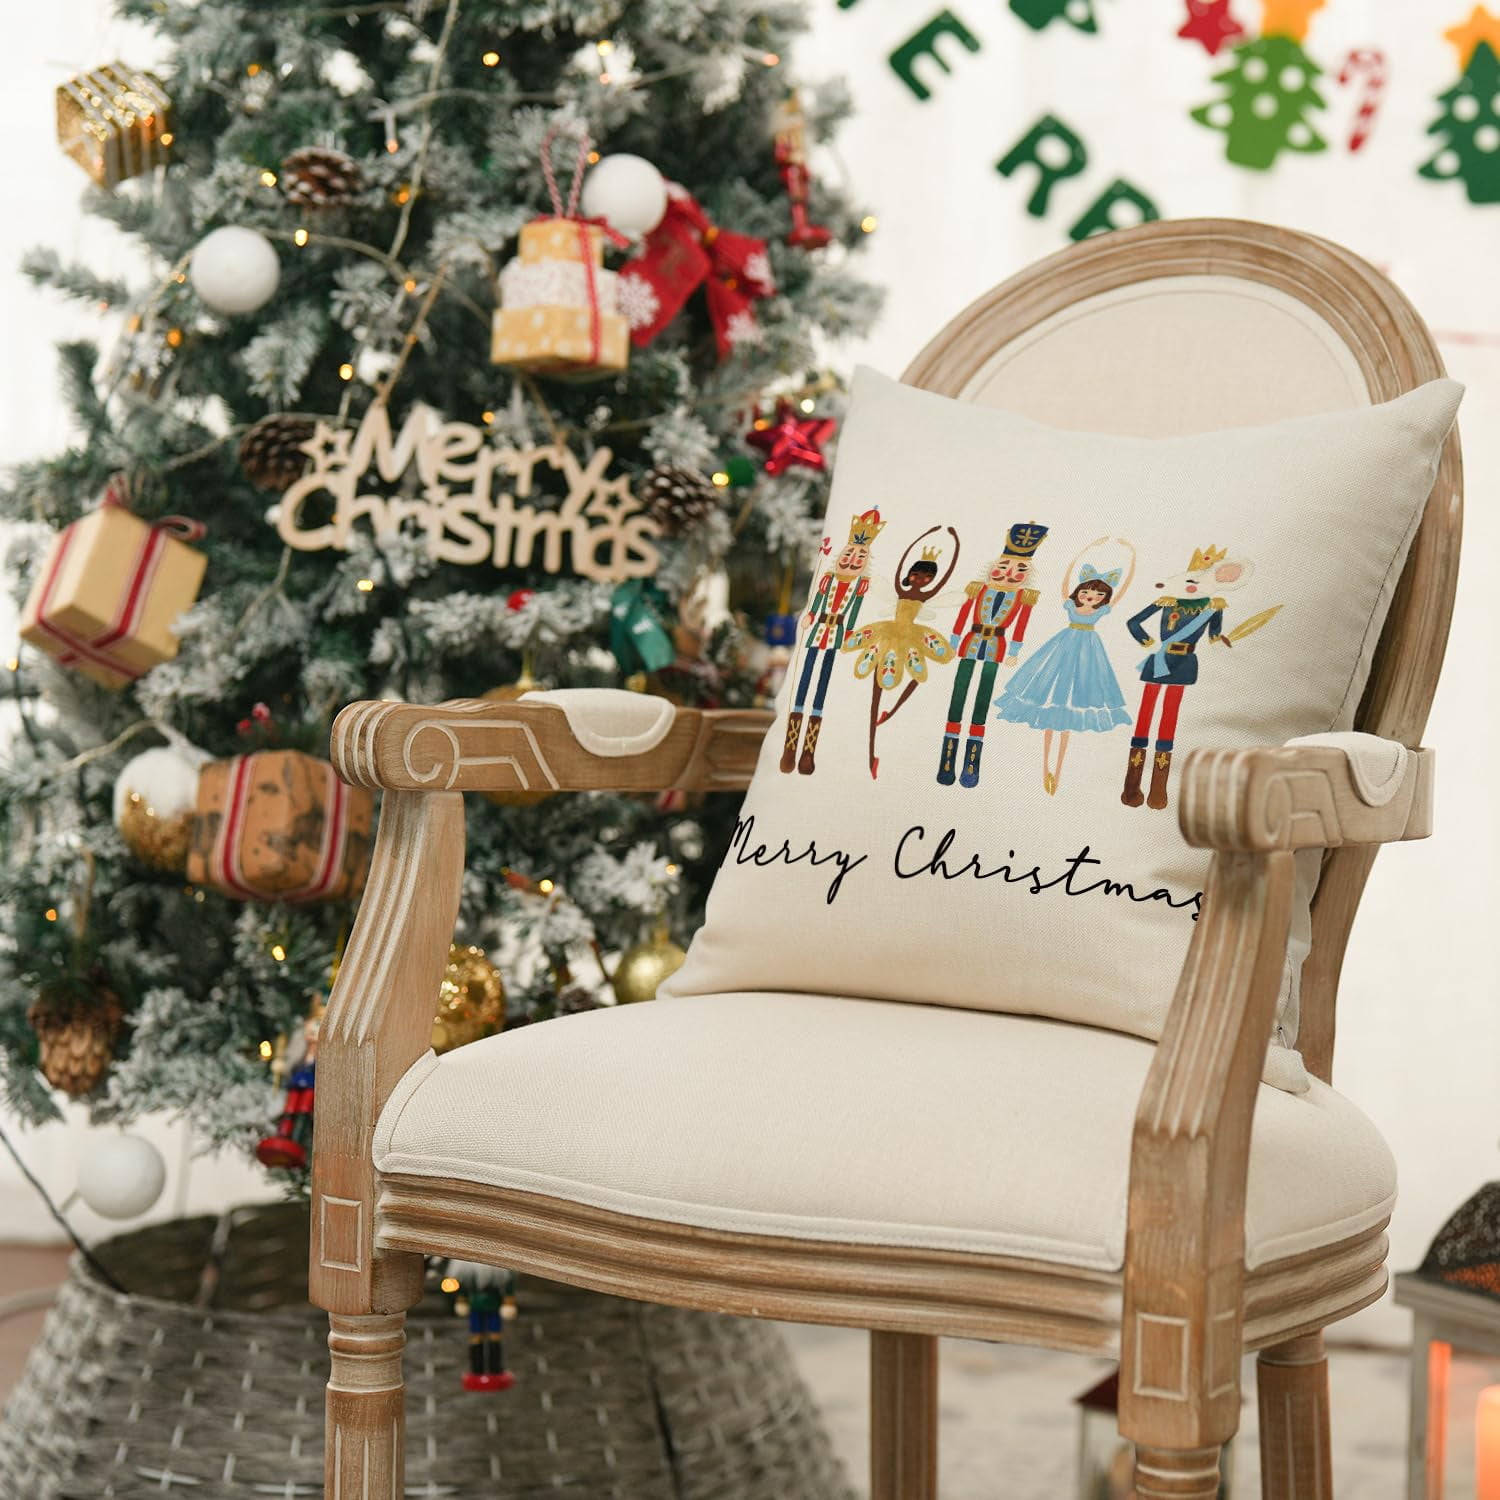  Lewondr Christmas Pillow Cover Set of 2 Merry Christmas  Nutcracker Throw Pillow Cover 18 x 18 Inch Embroidery Cartoon Home Decor  Square Cushion Case for Winter Holiday Party Xmas Sofa Bed